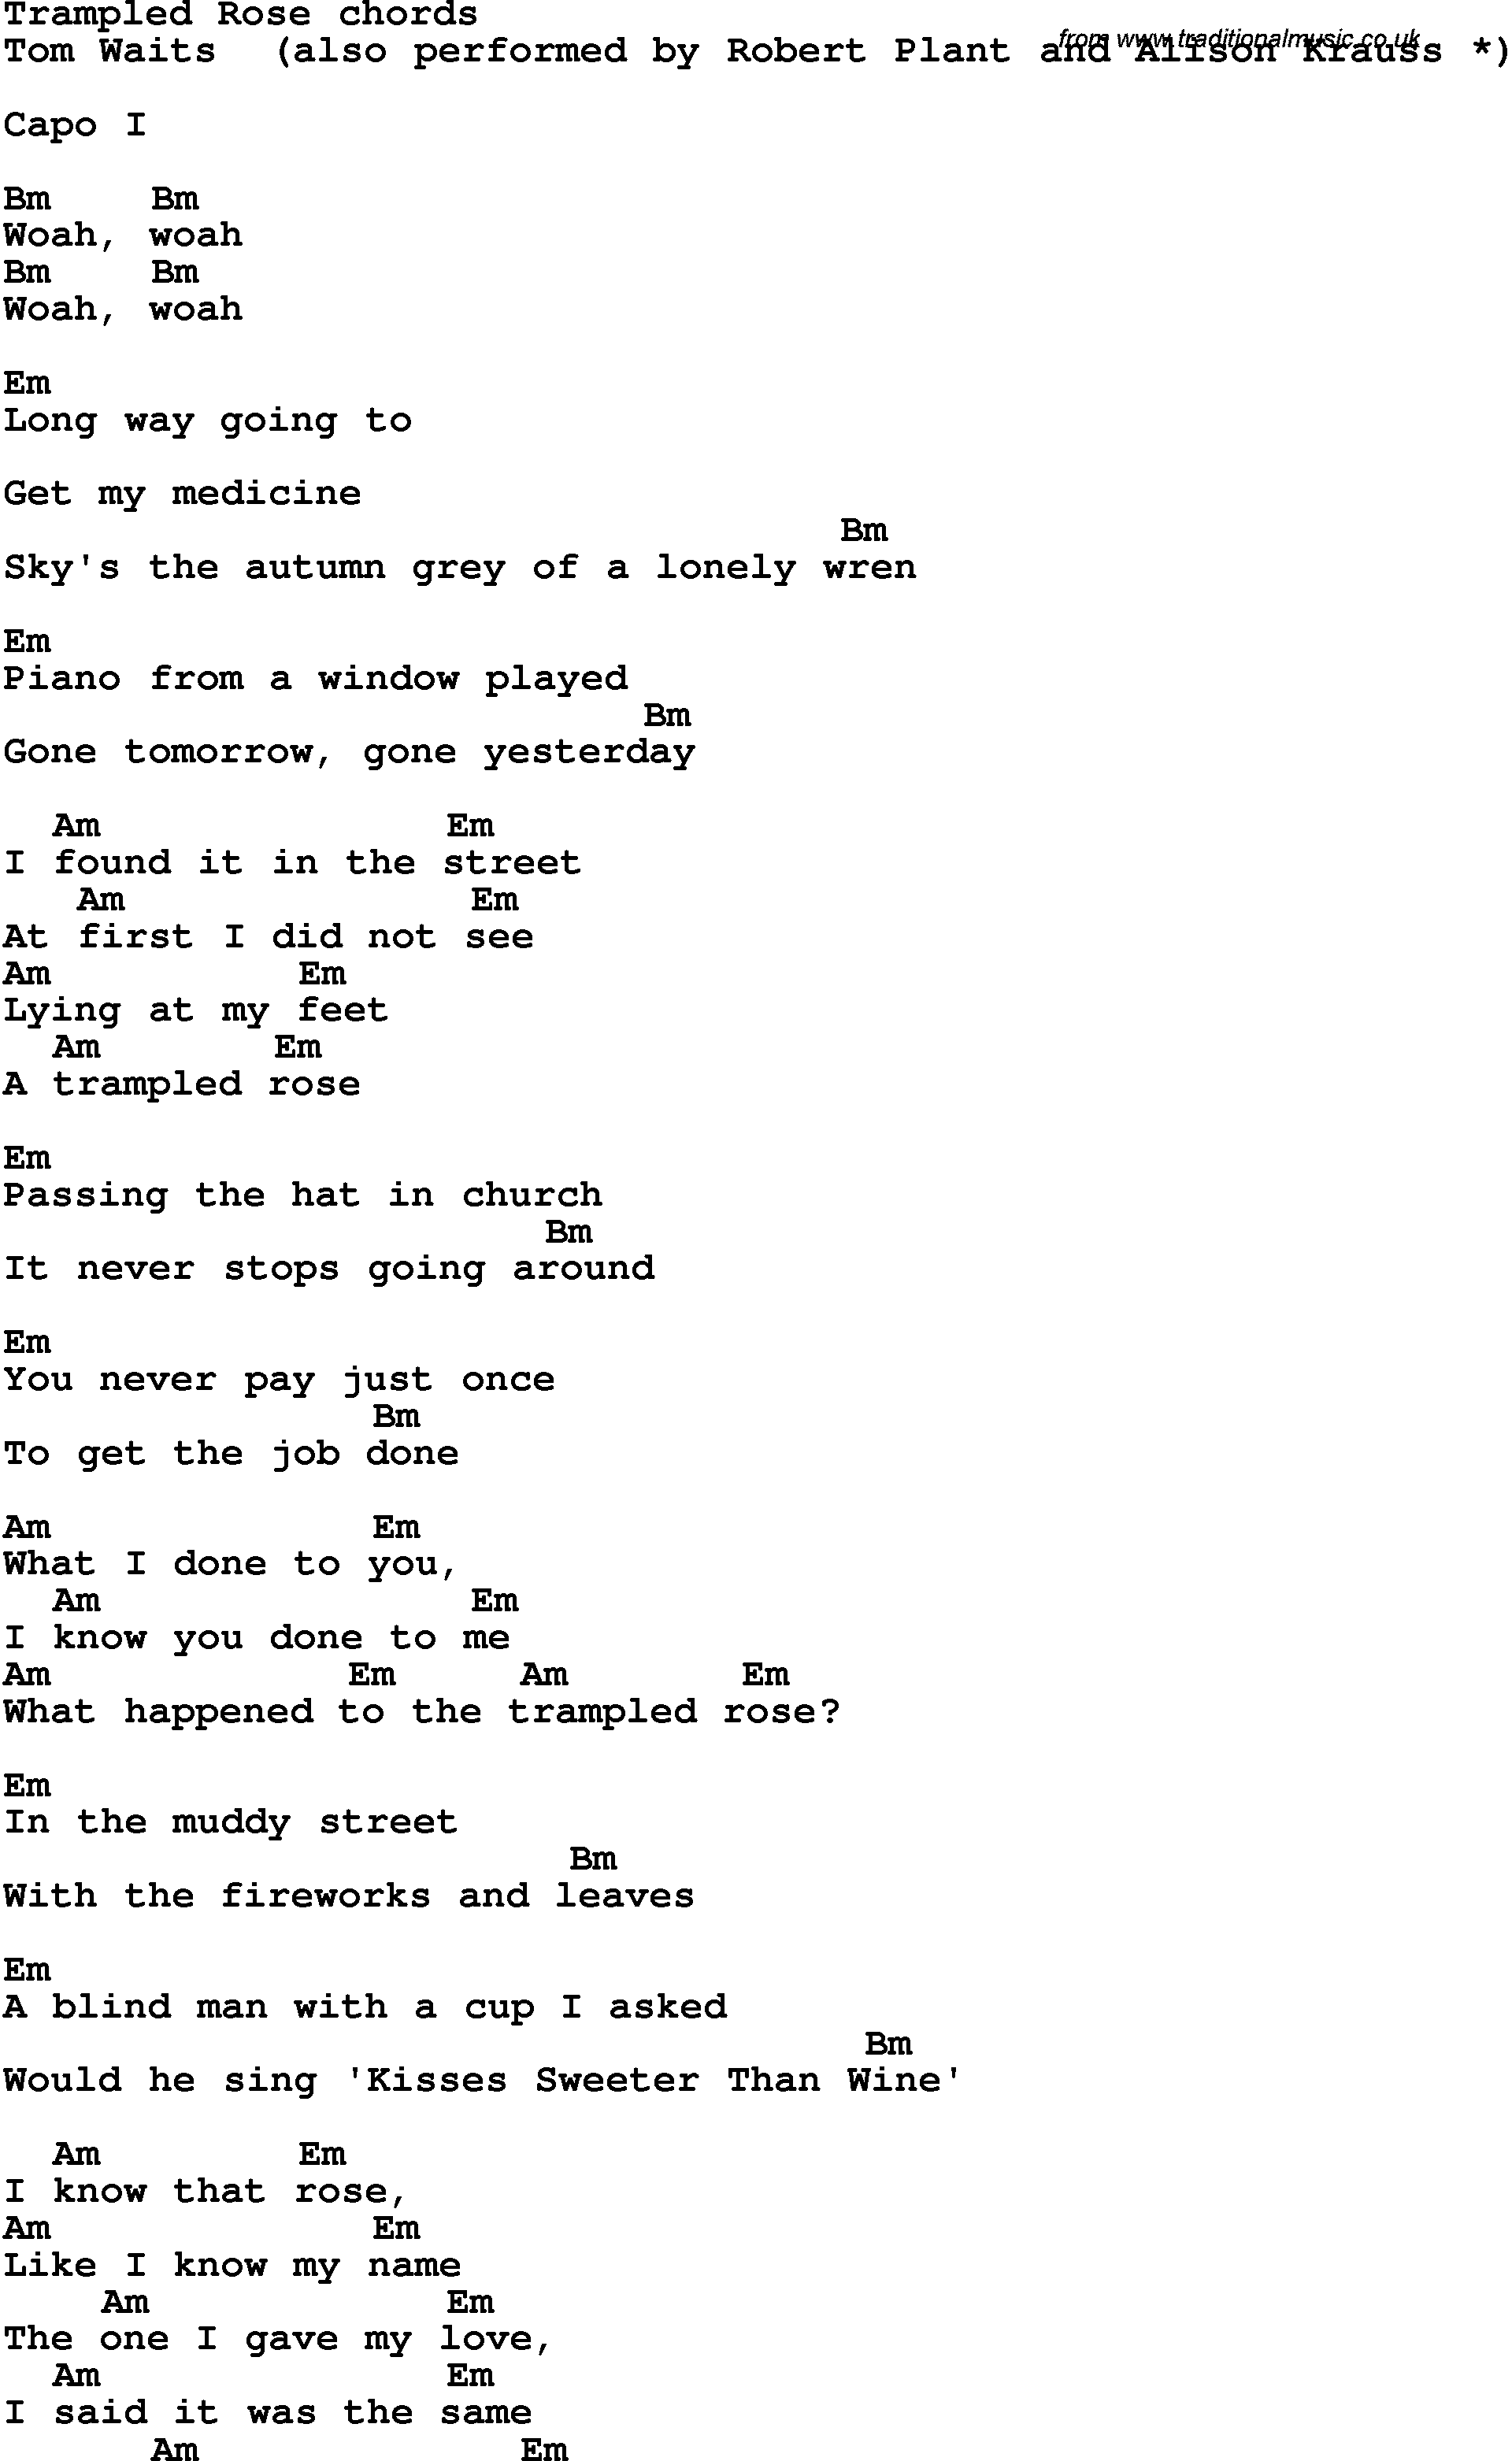 Song Lyrics with guitar chords for Trampled Rose